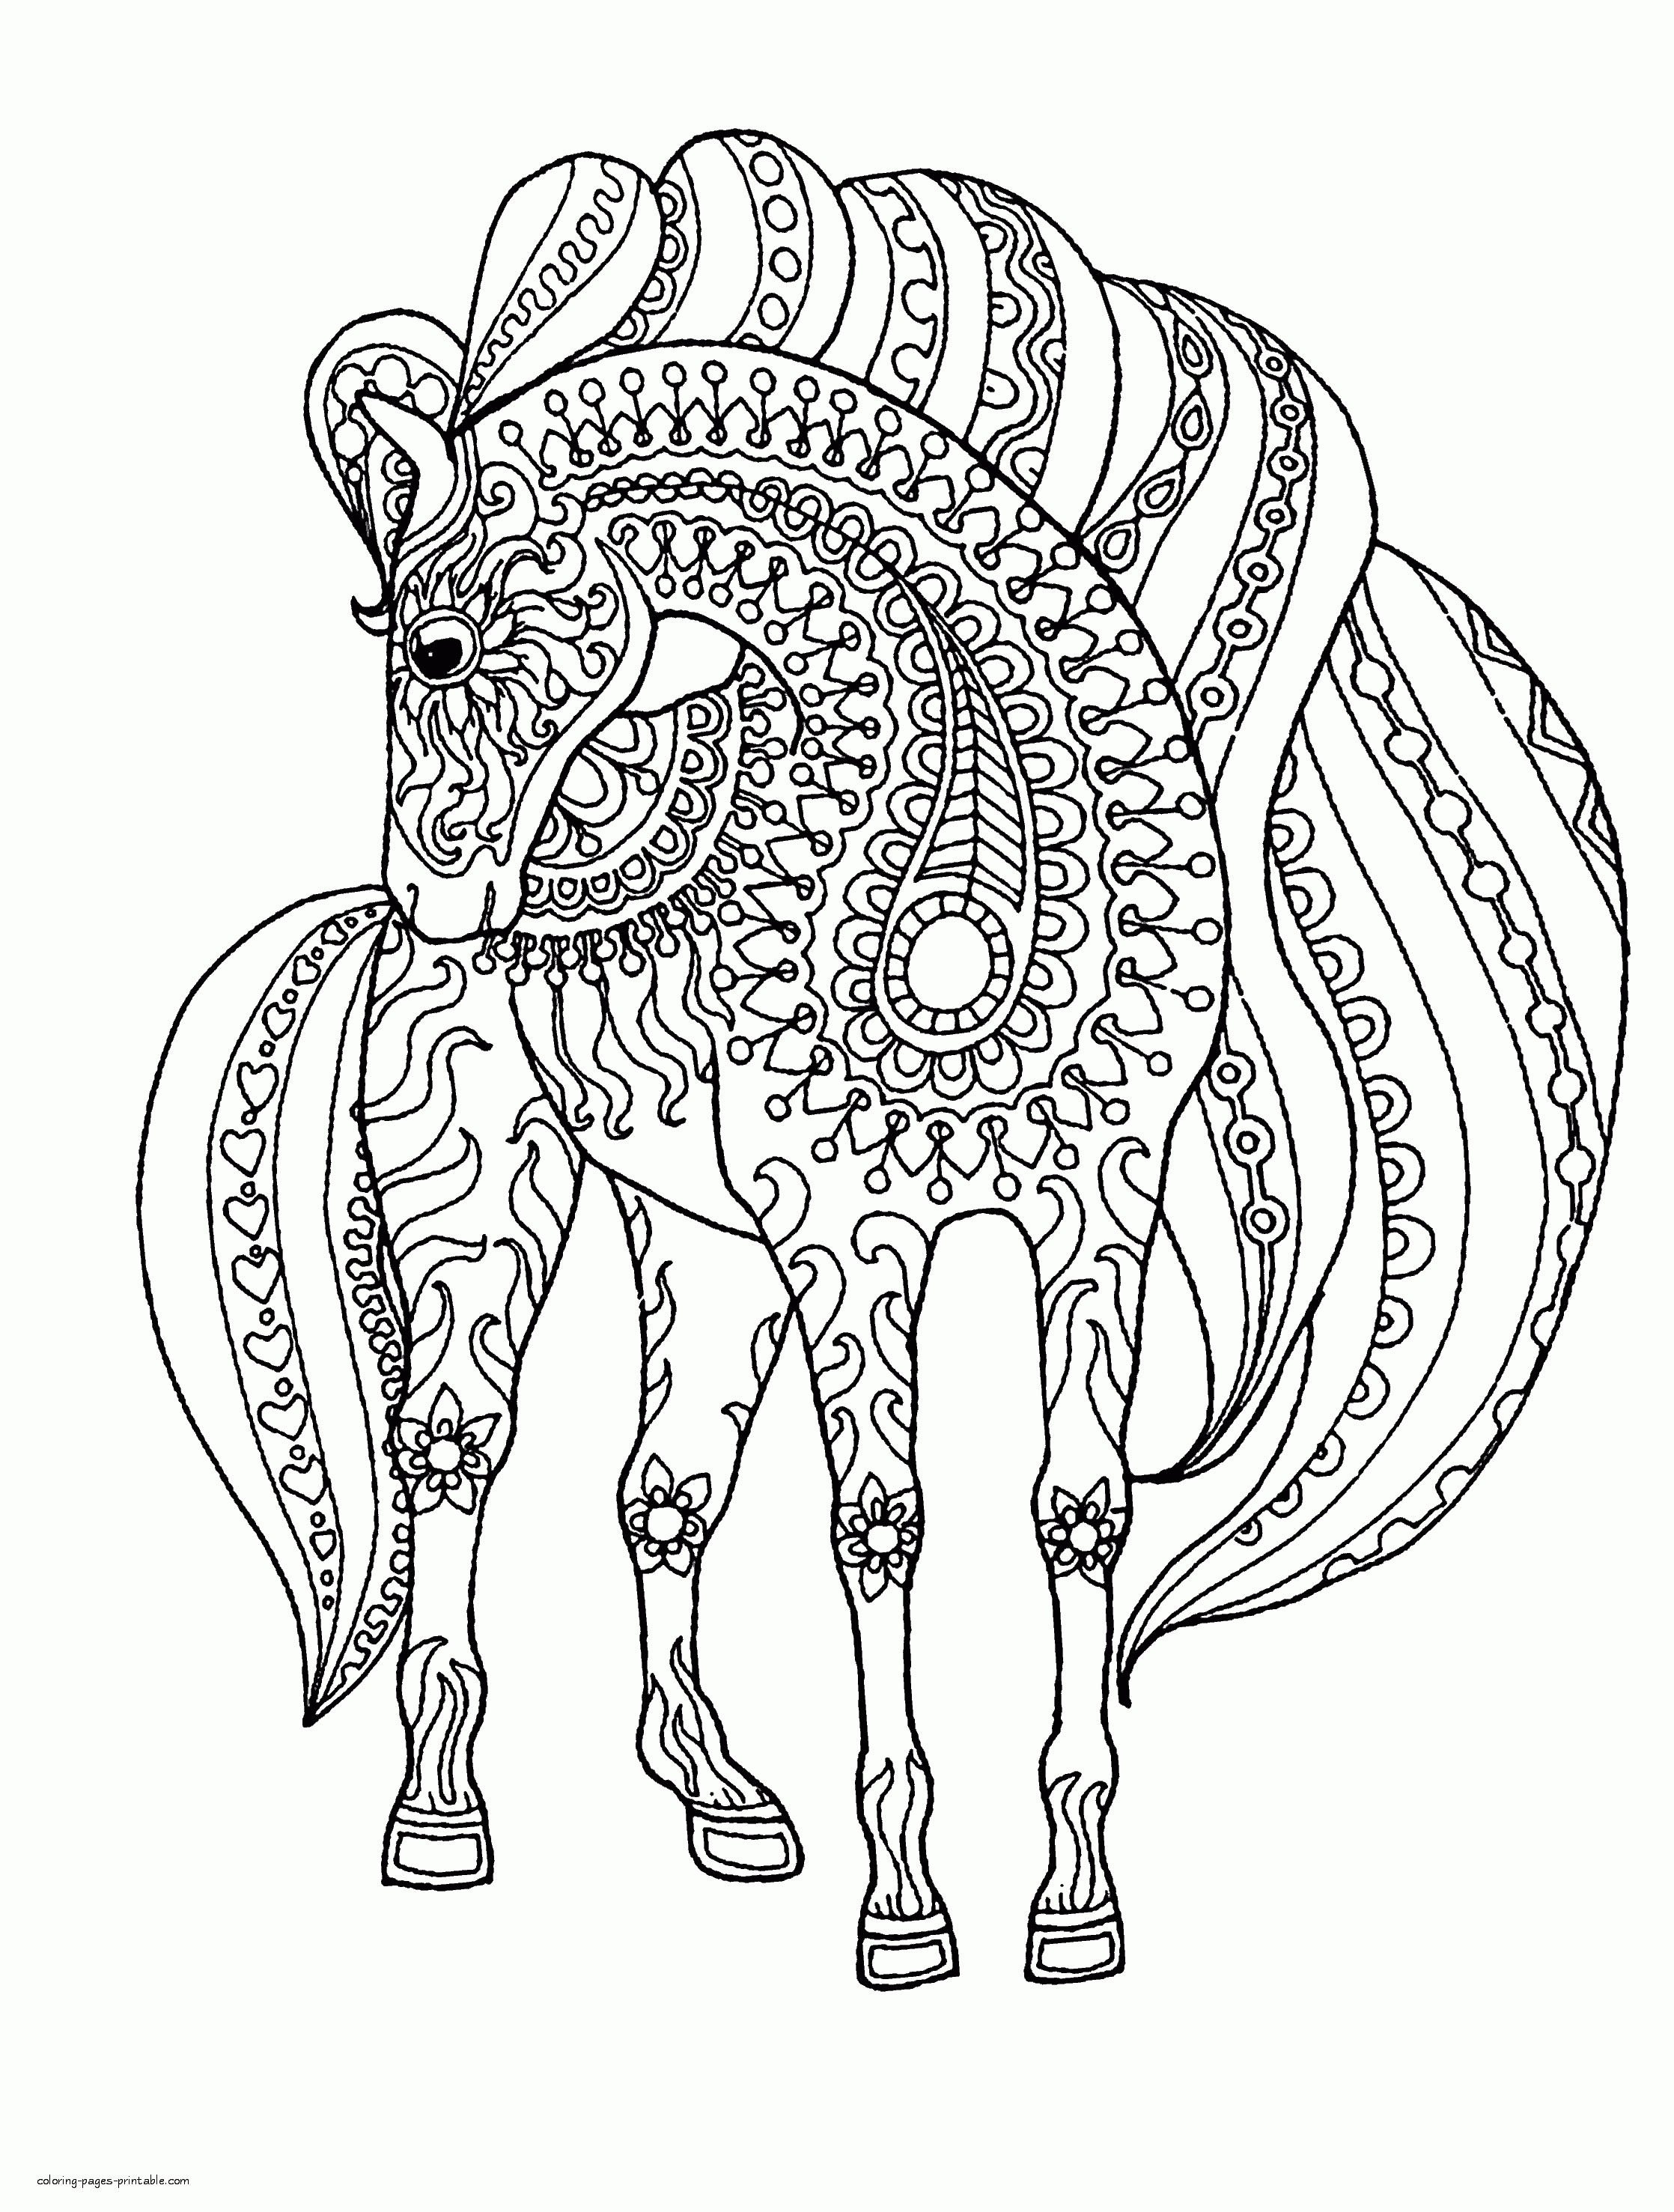 Horse Coloring Pages For Adults    COLORING PAGES PRINTABLE.COM